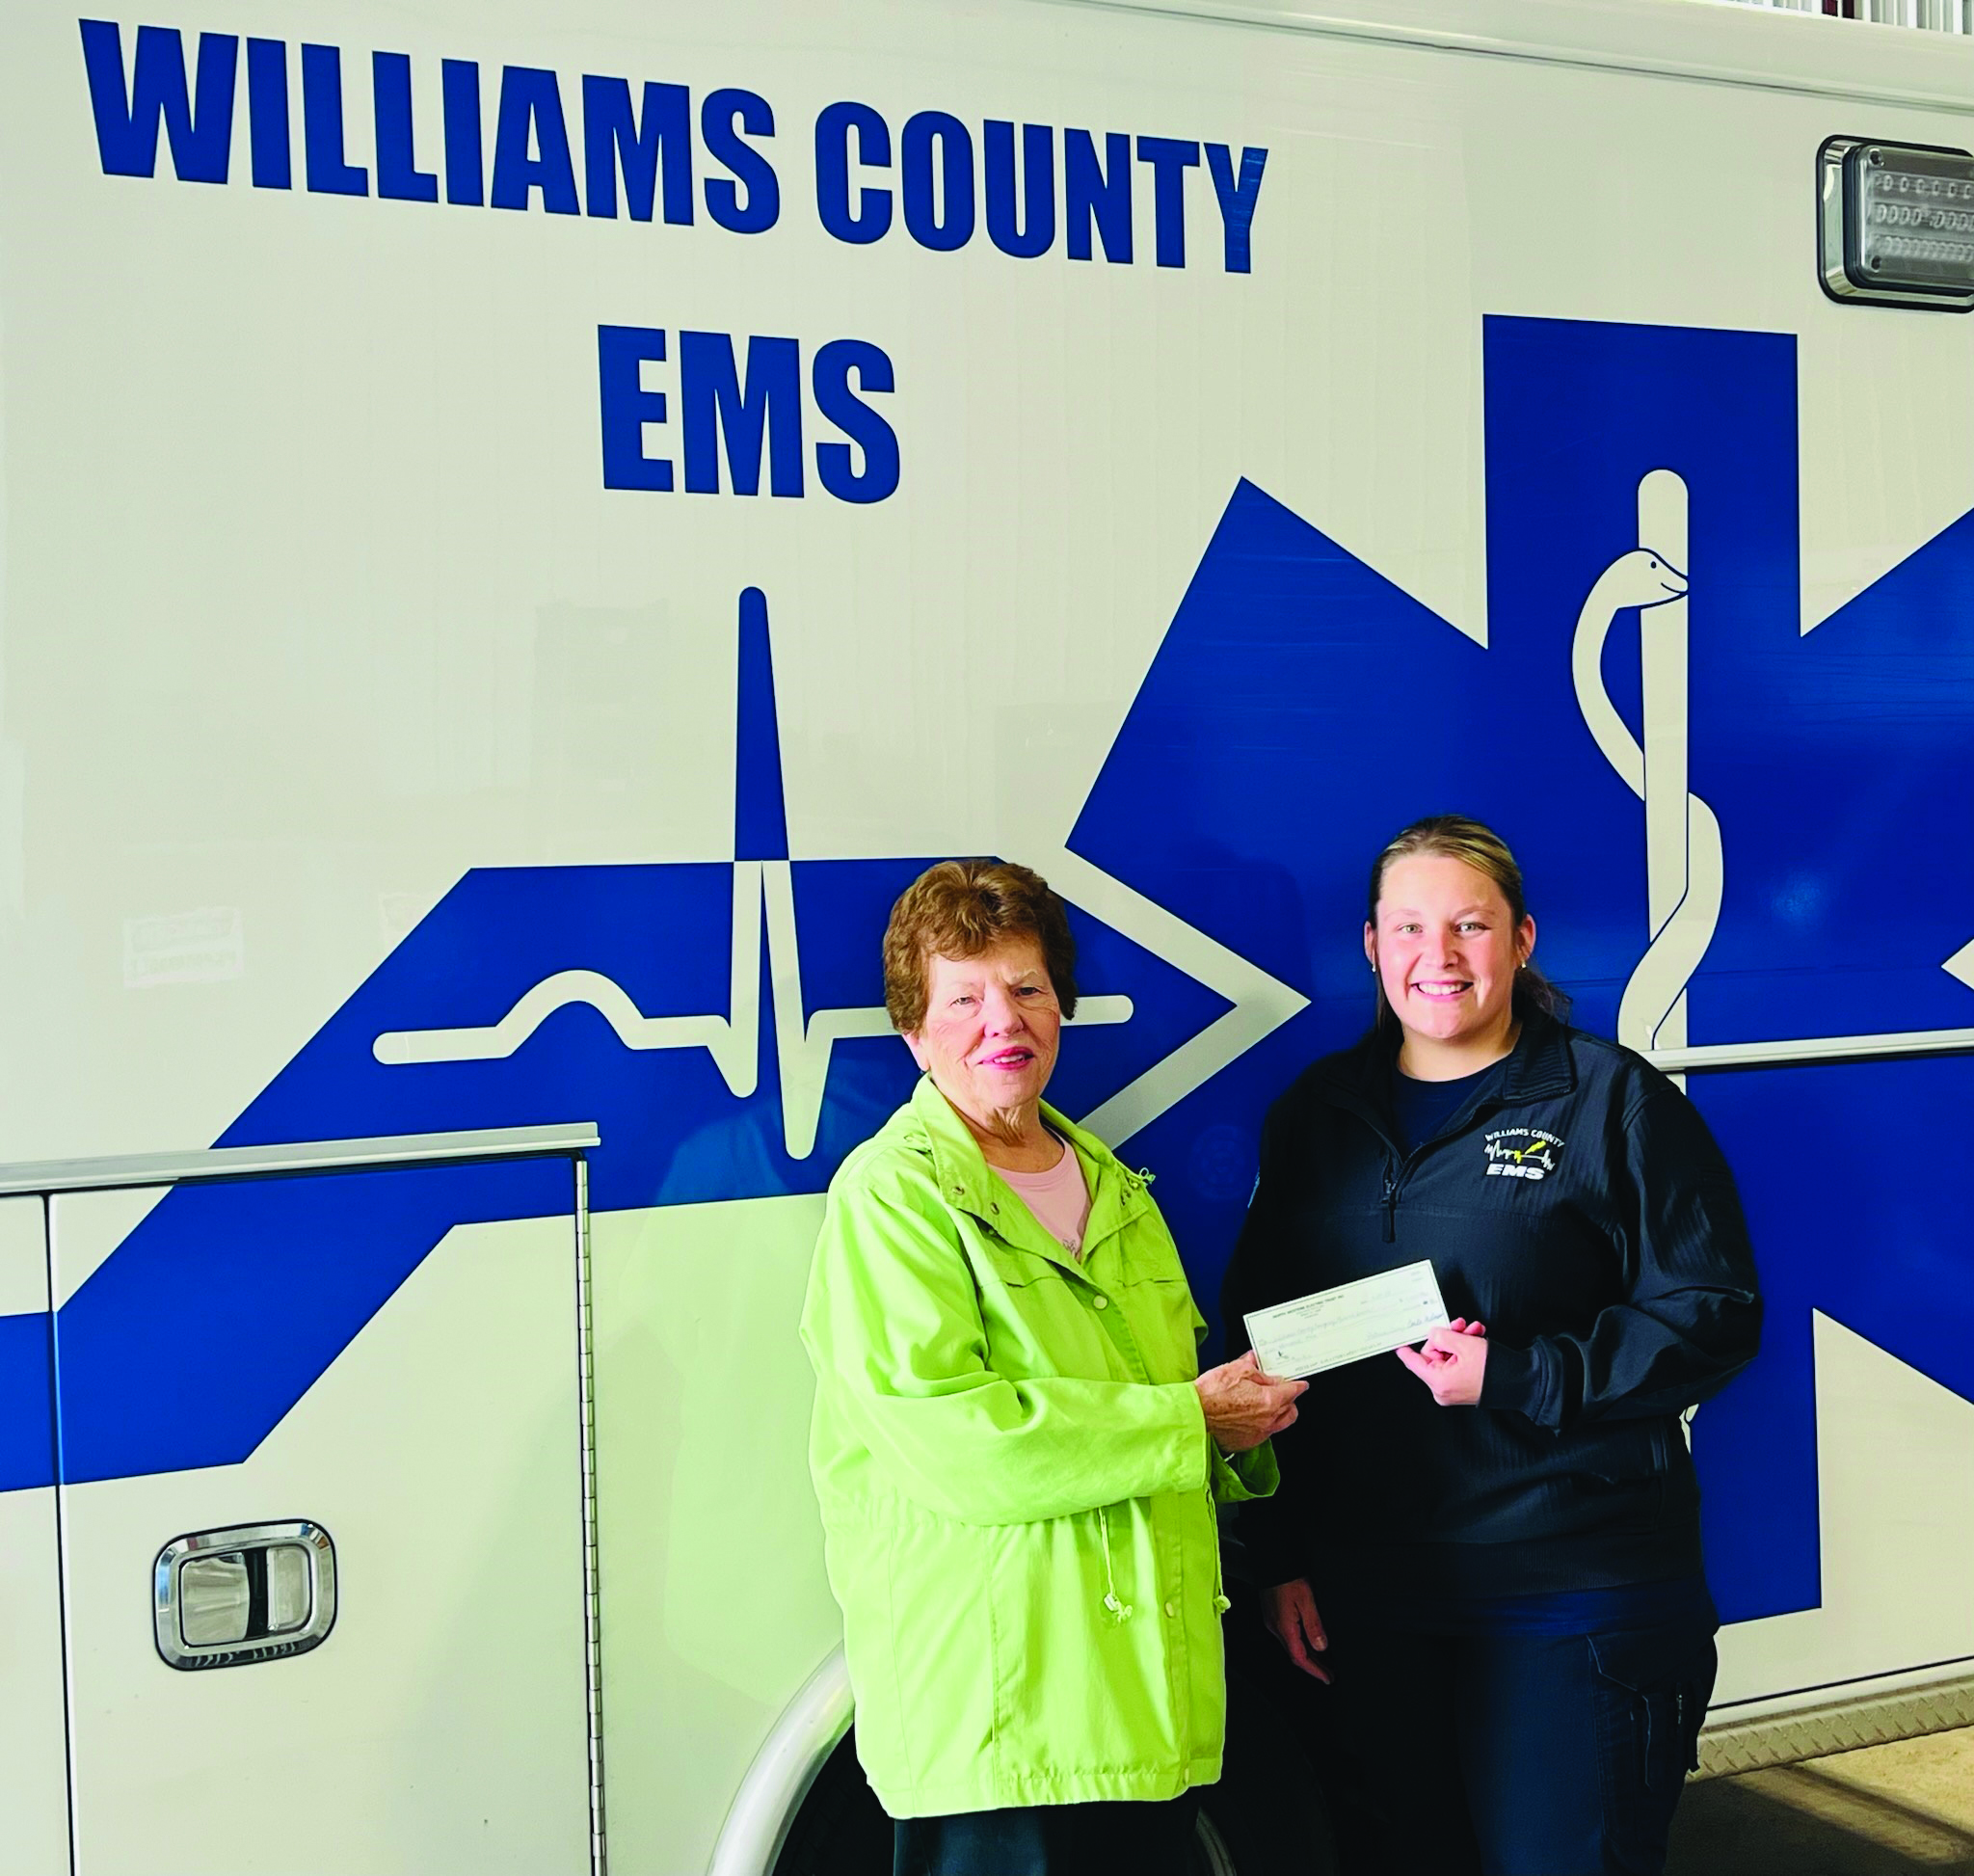 TWO WOMEN STANDING NEXT TO AMBULANCE HOLDING A CHECK